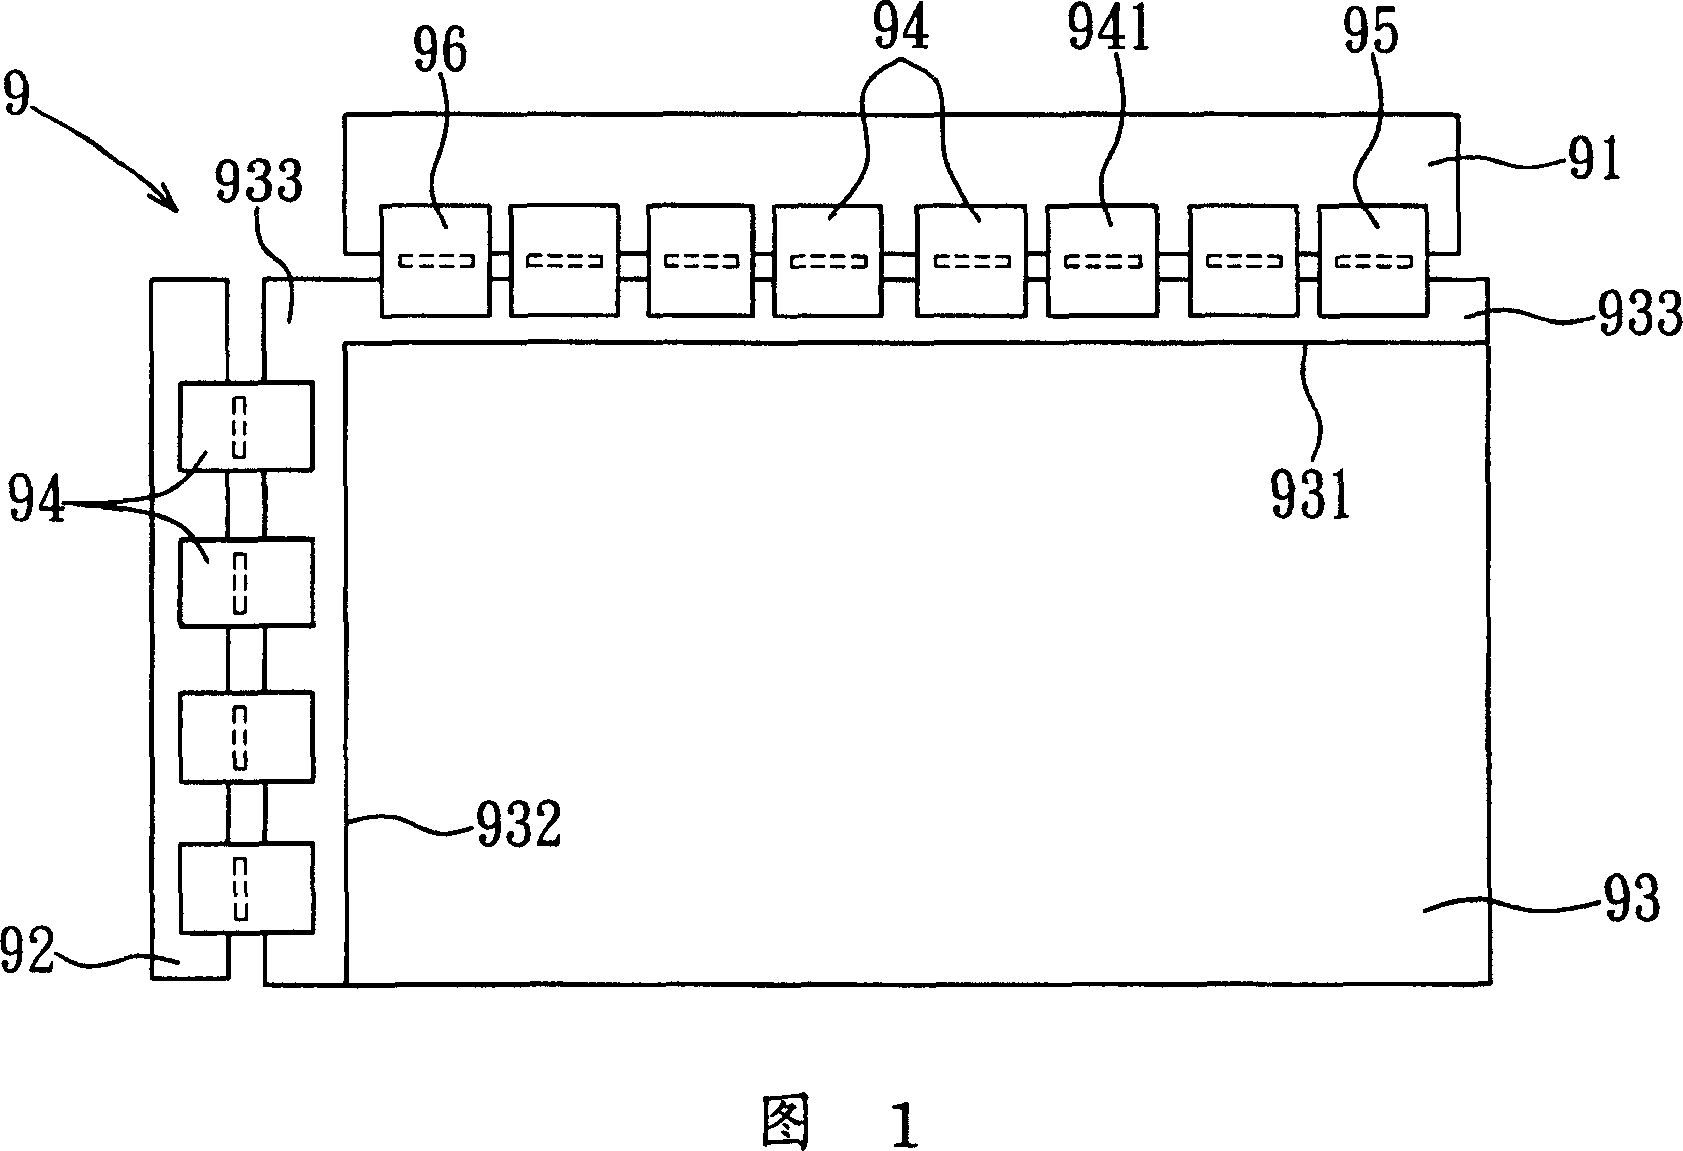 Liquid crystal display faceplate device, and tape coiling type encapsulation for the liquid crystal display faceplate device